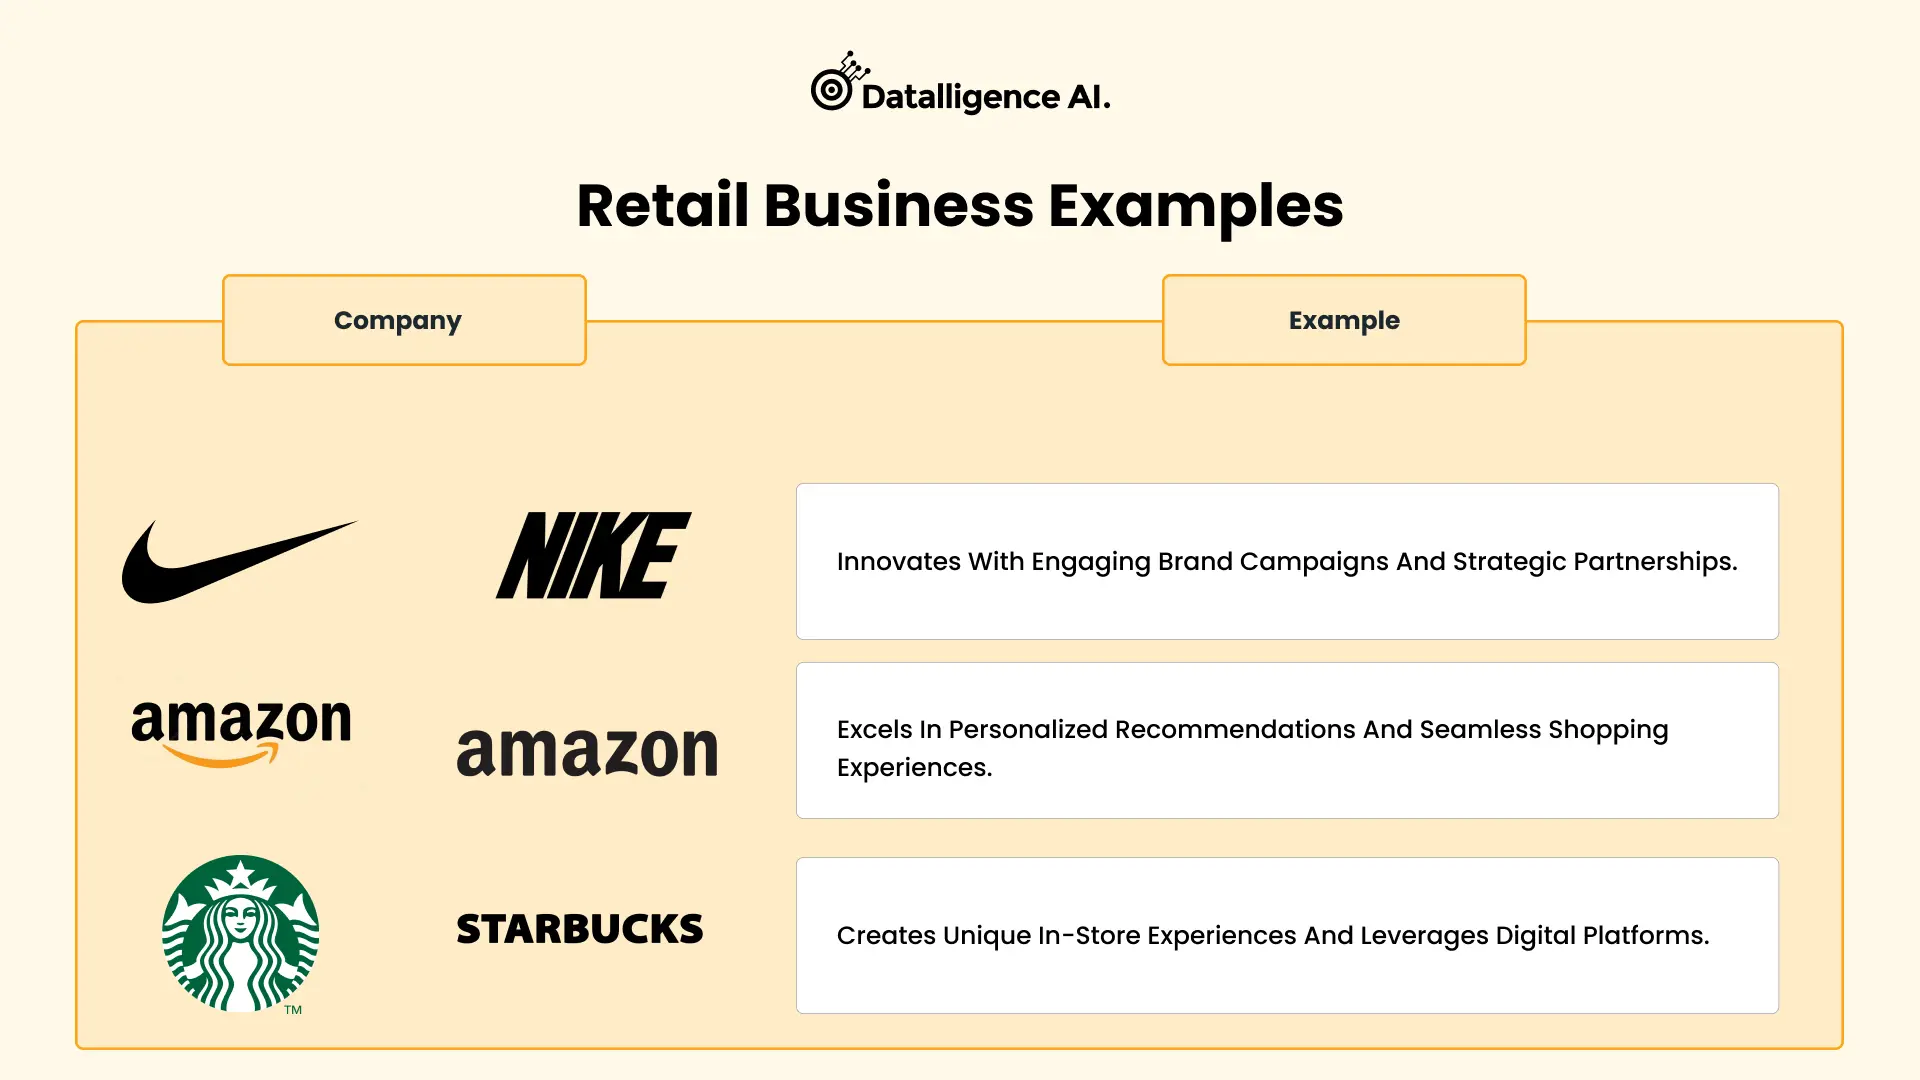 Retail business examples